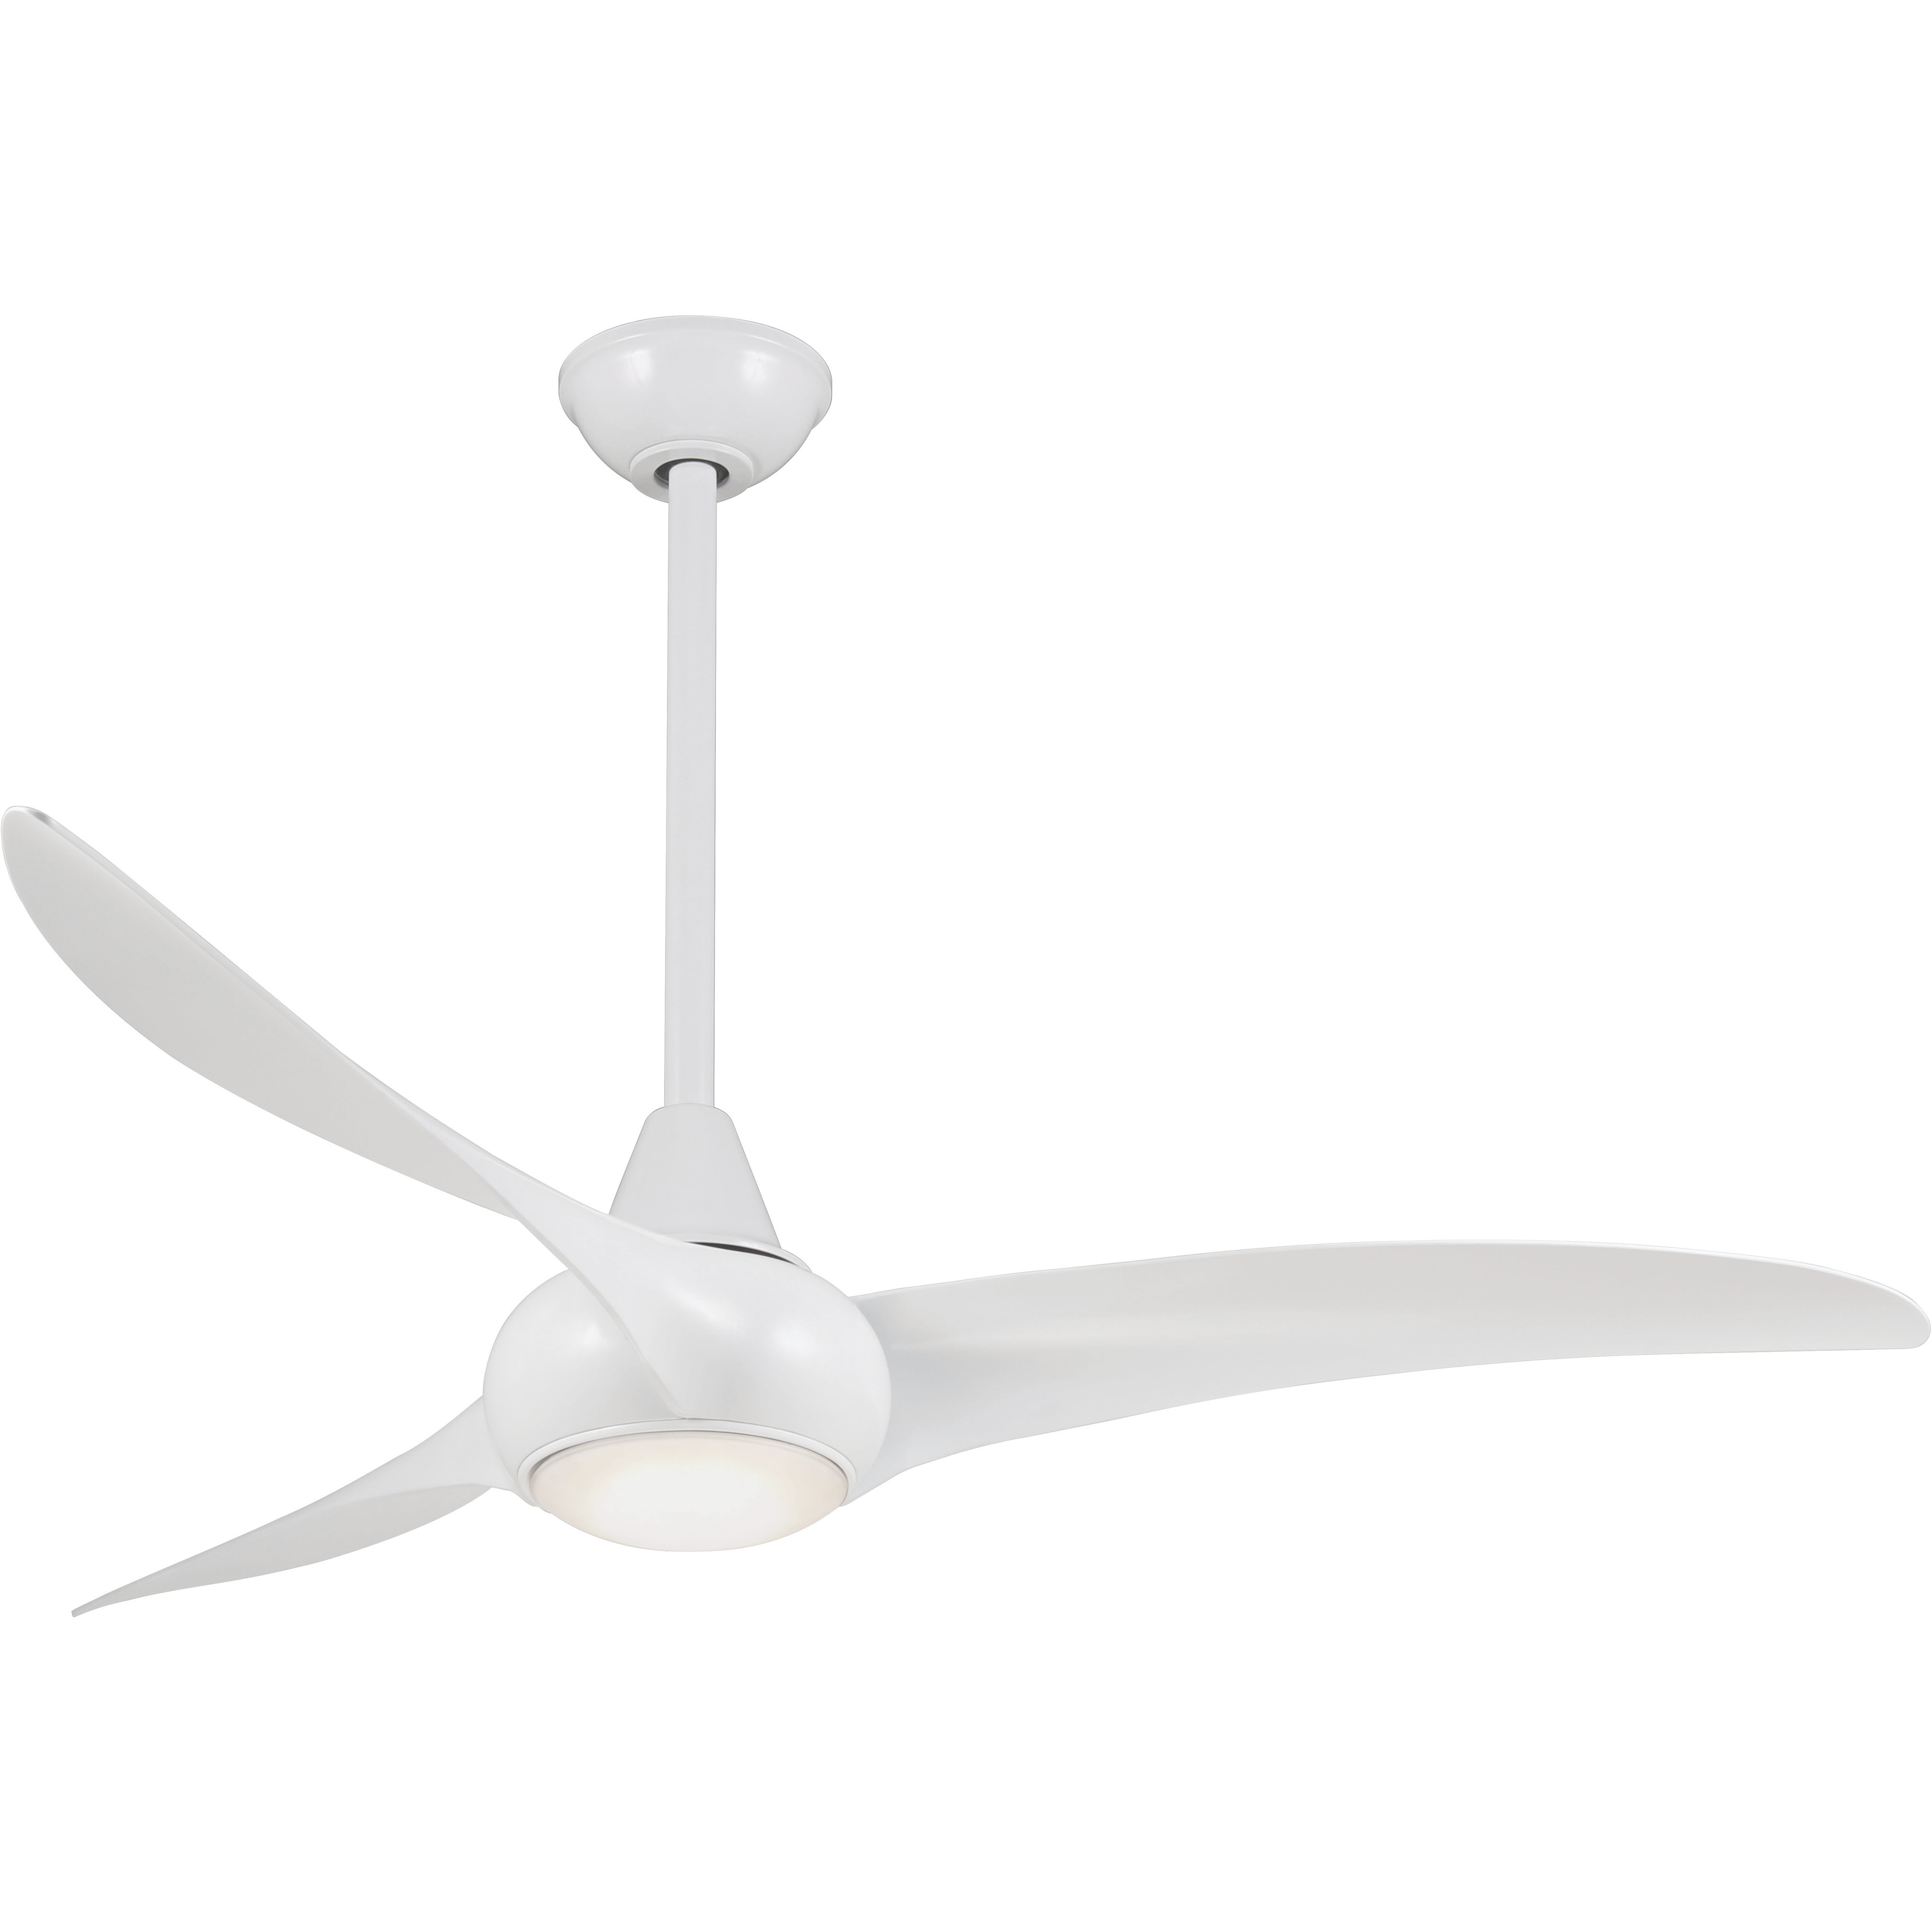 Minka Aire F844 Wh Light Wave 52 Inch